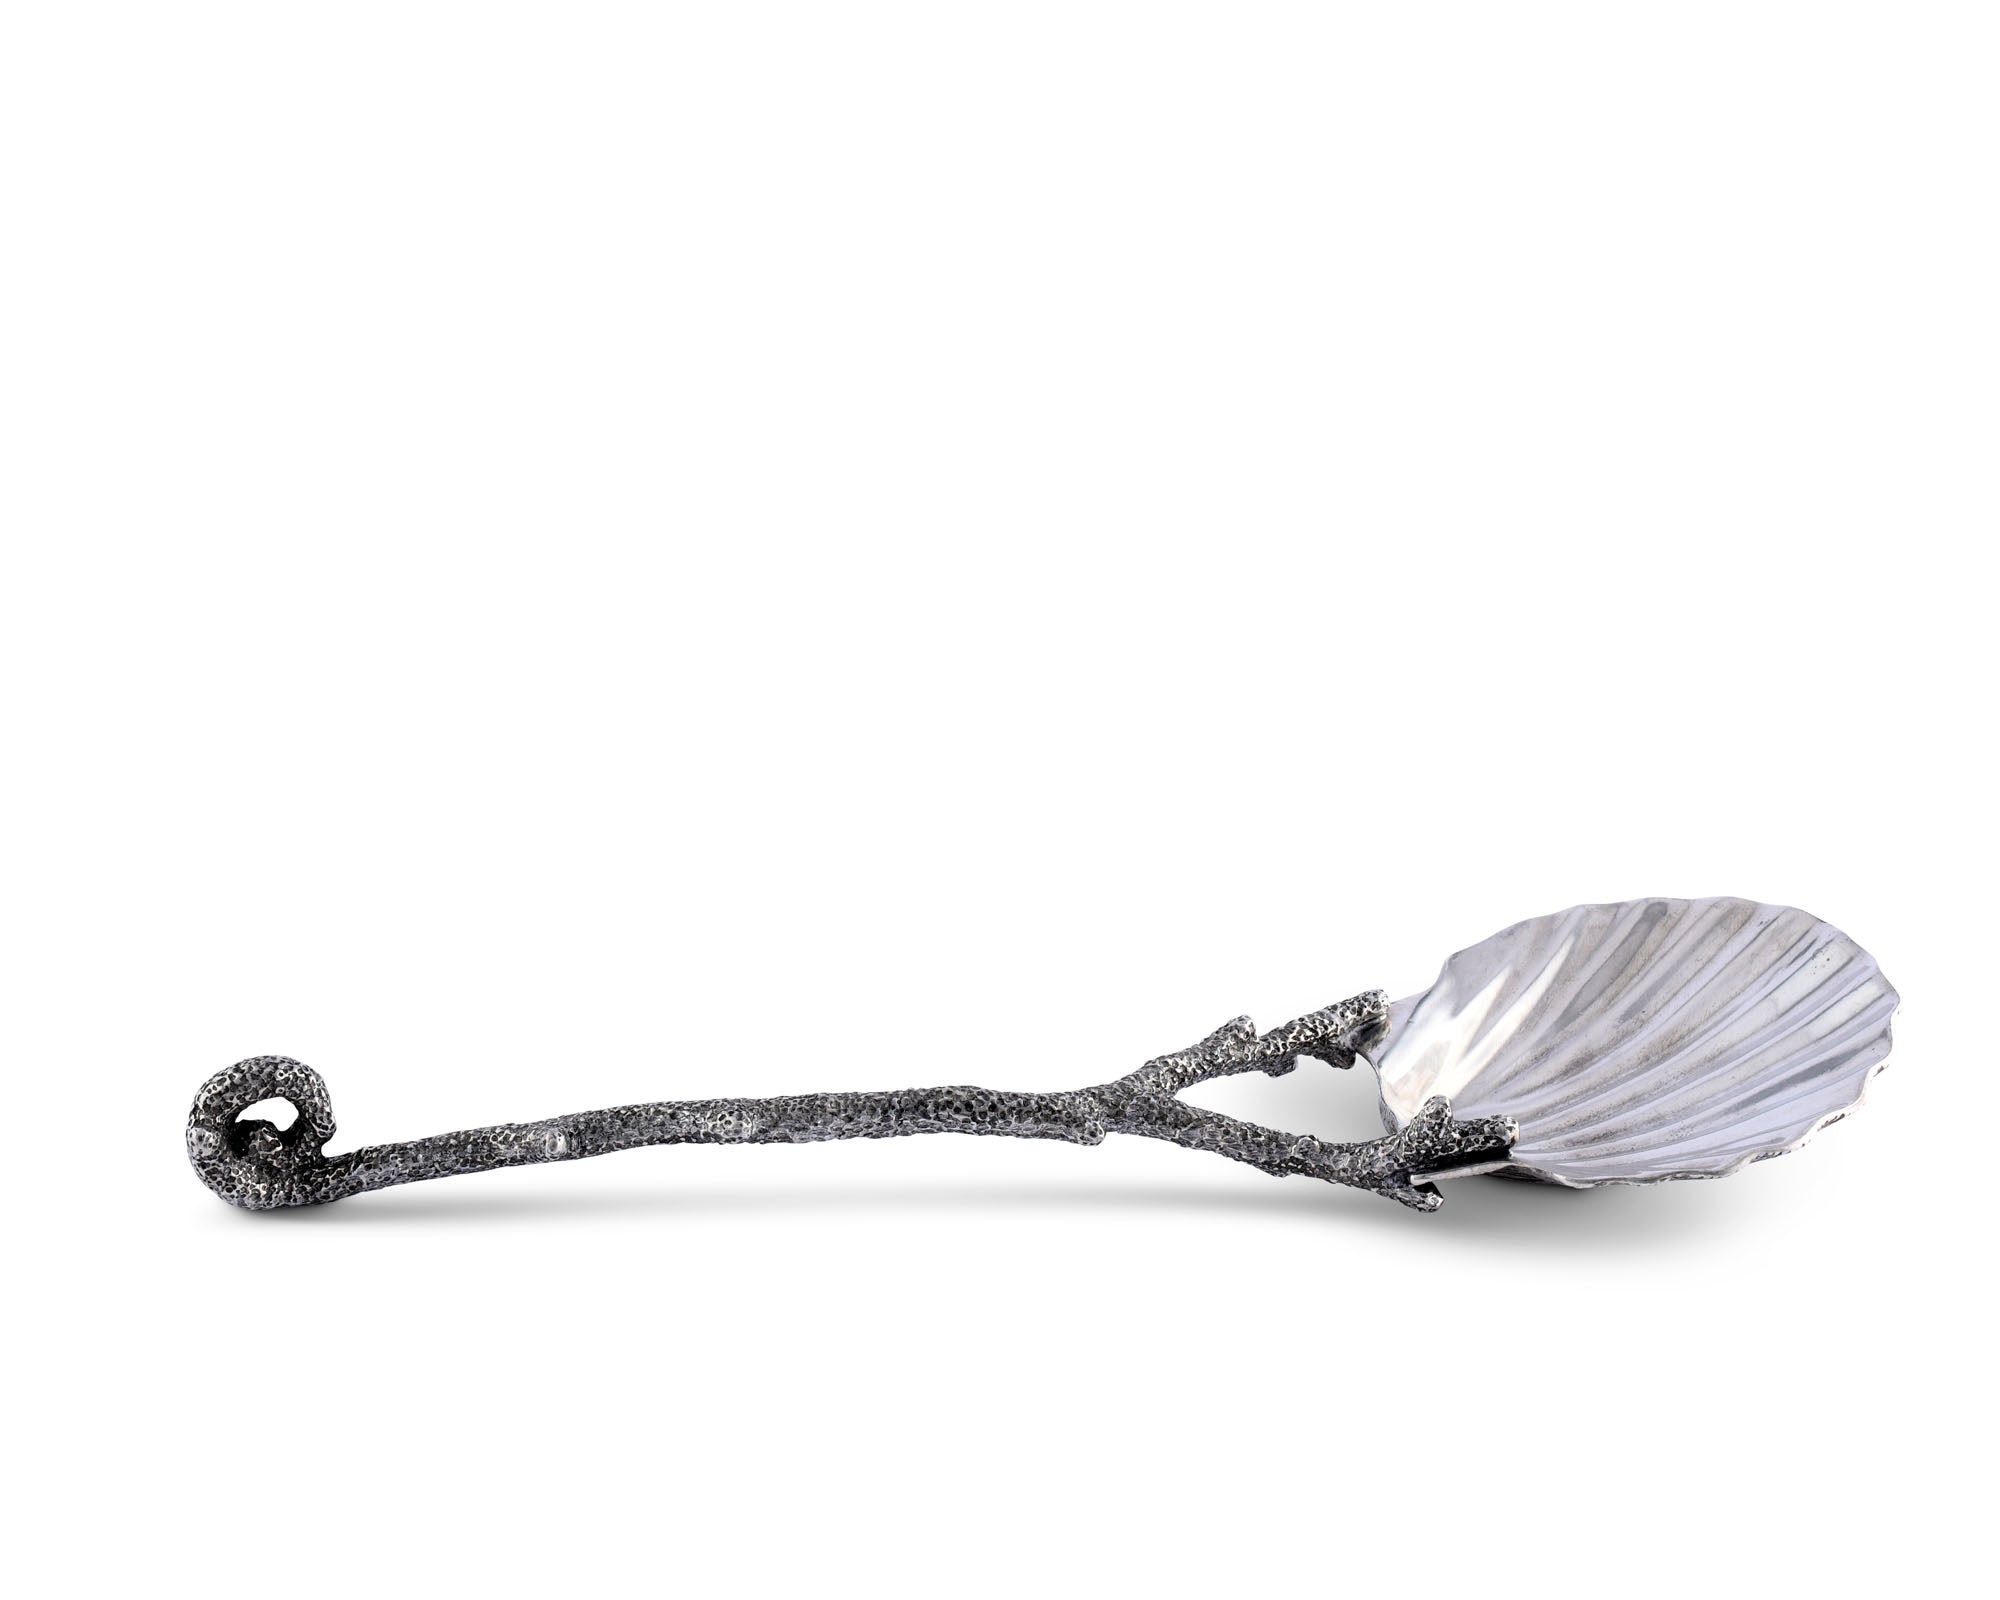 Vagabond House Scallop Shell Coral Serving Spoon Product Image